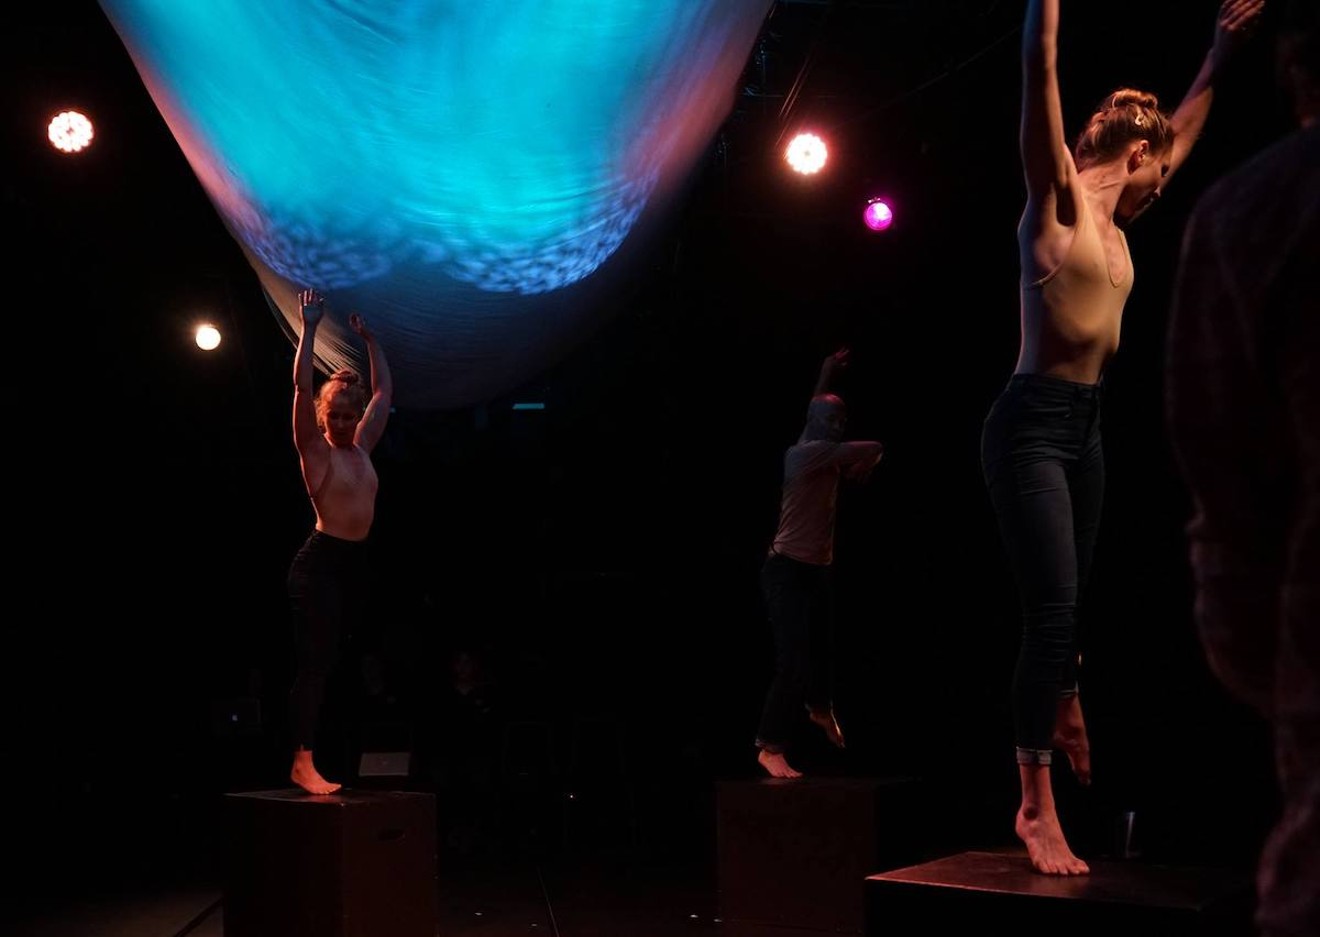 HOME — where dance lives is a pair of programs that shine a light on the work of Wild Heart Dance, the Life/Art Dance Ensemble, Art as Action, Mary Lynn Lewark and Other Rooms.